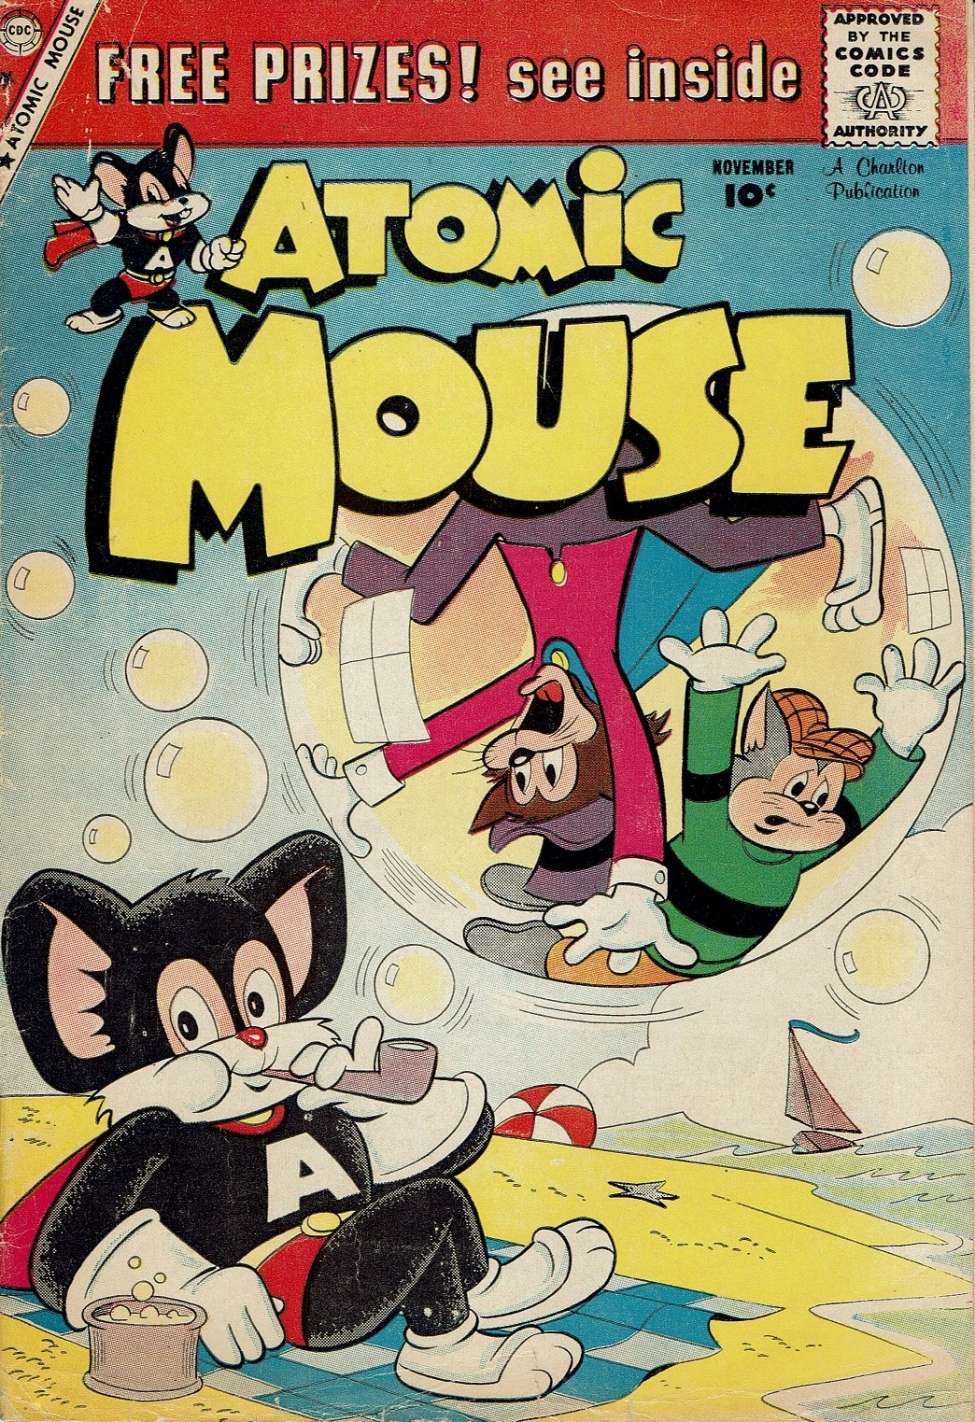 Book Cover For Atomic Mouse 33